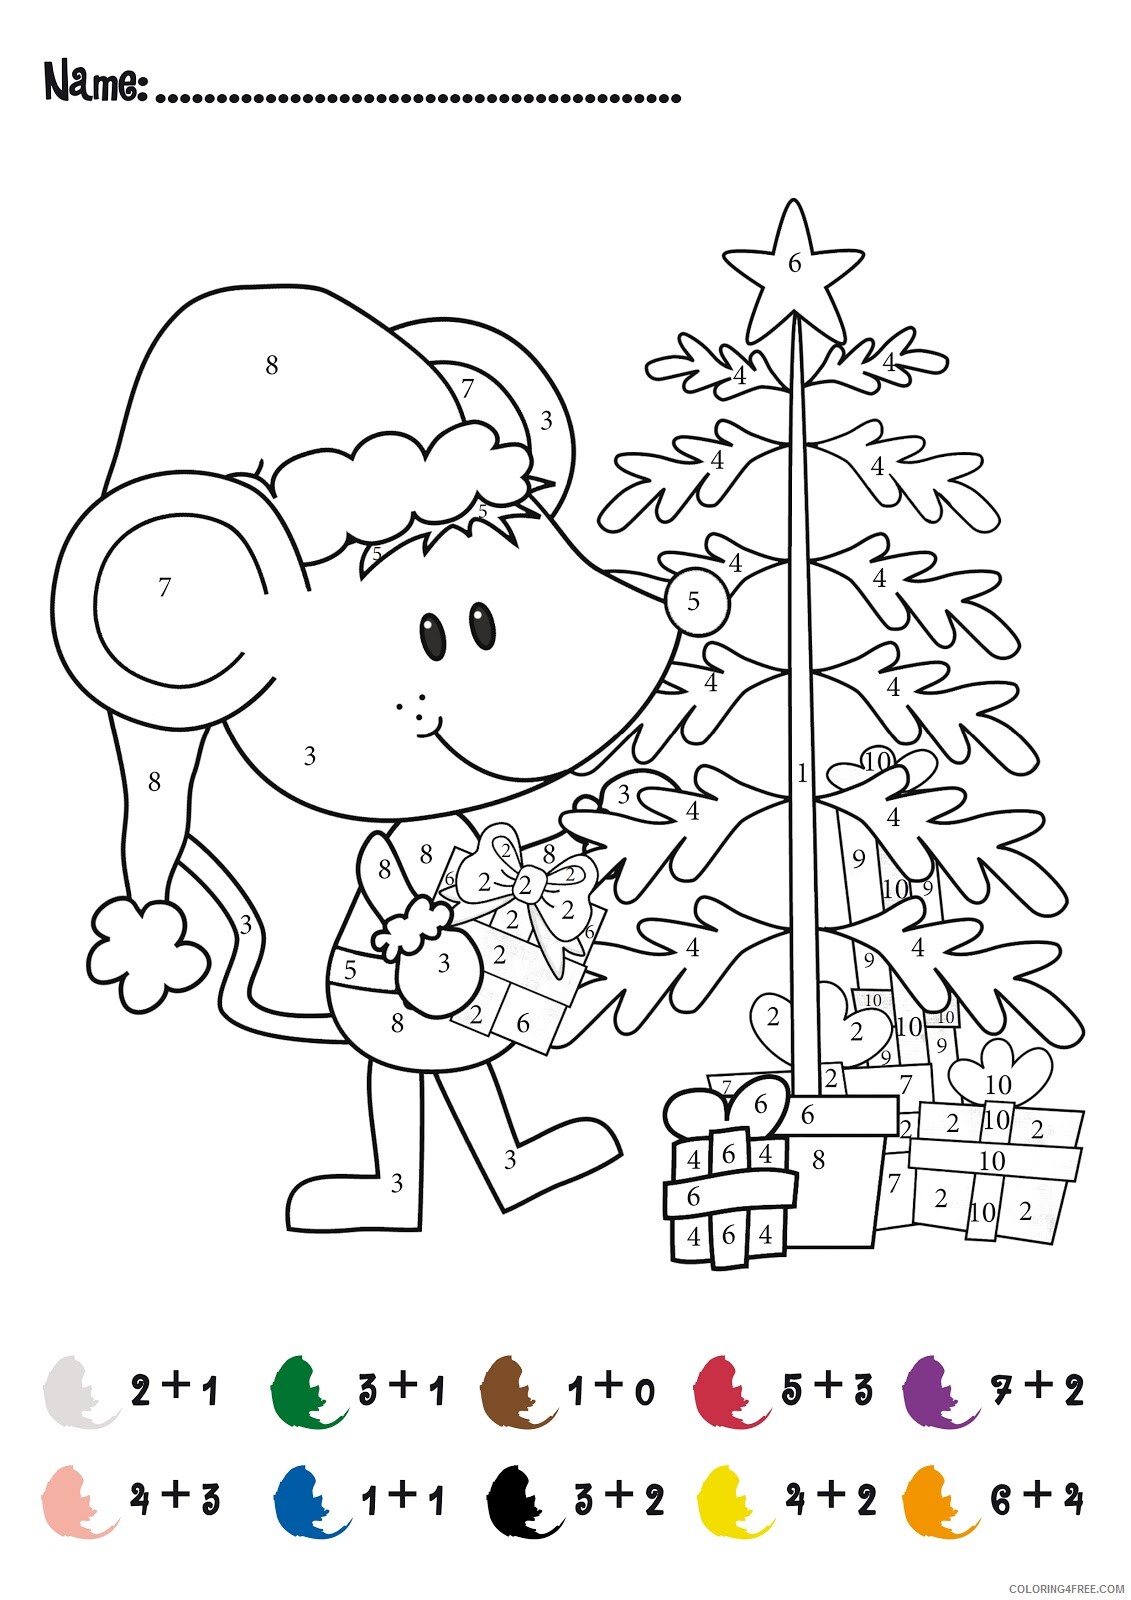 Addition Coloring Pages Educational Free by Numbers Printable 2020 0570 Coloring4free